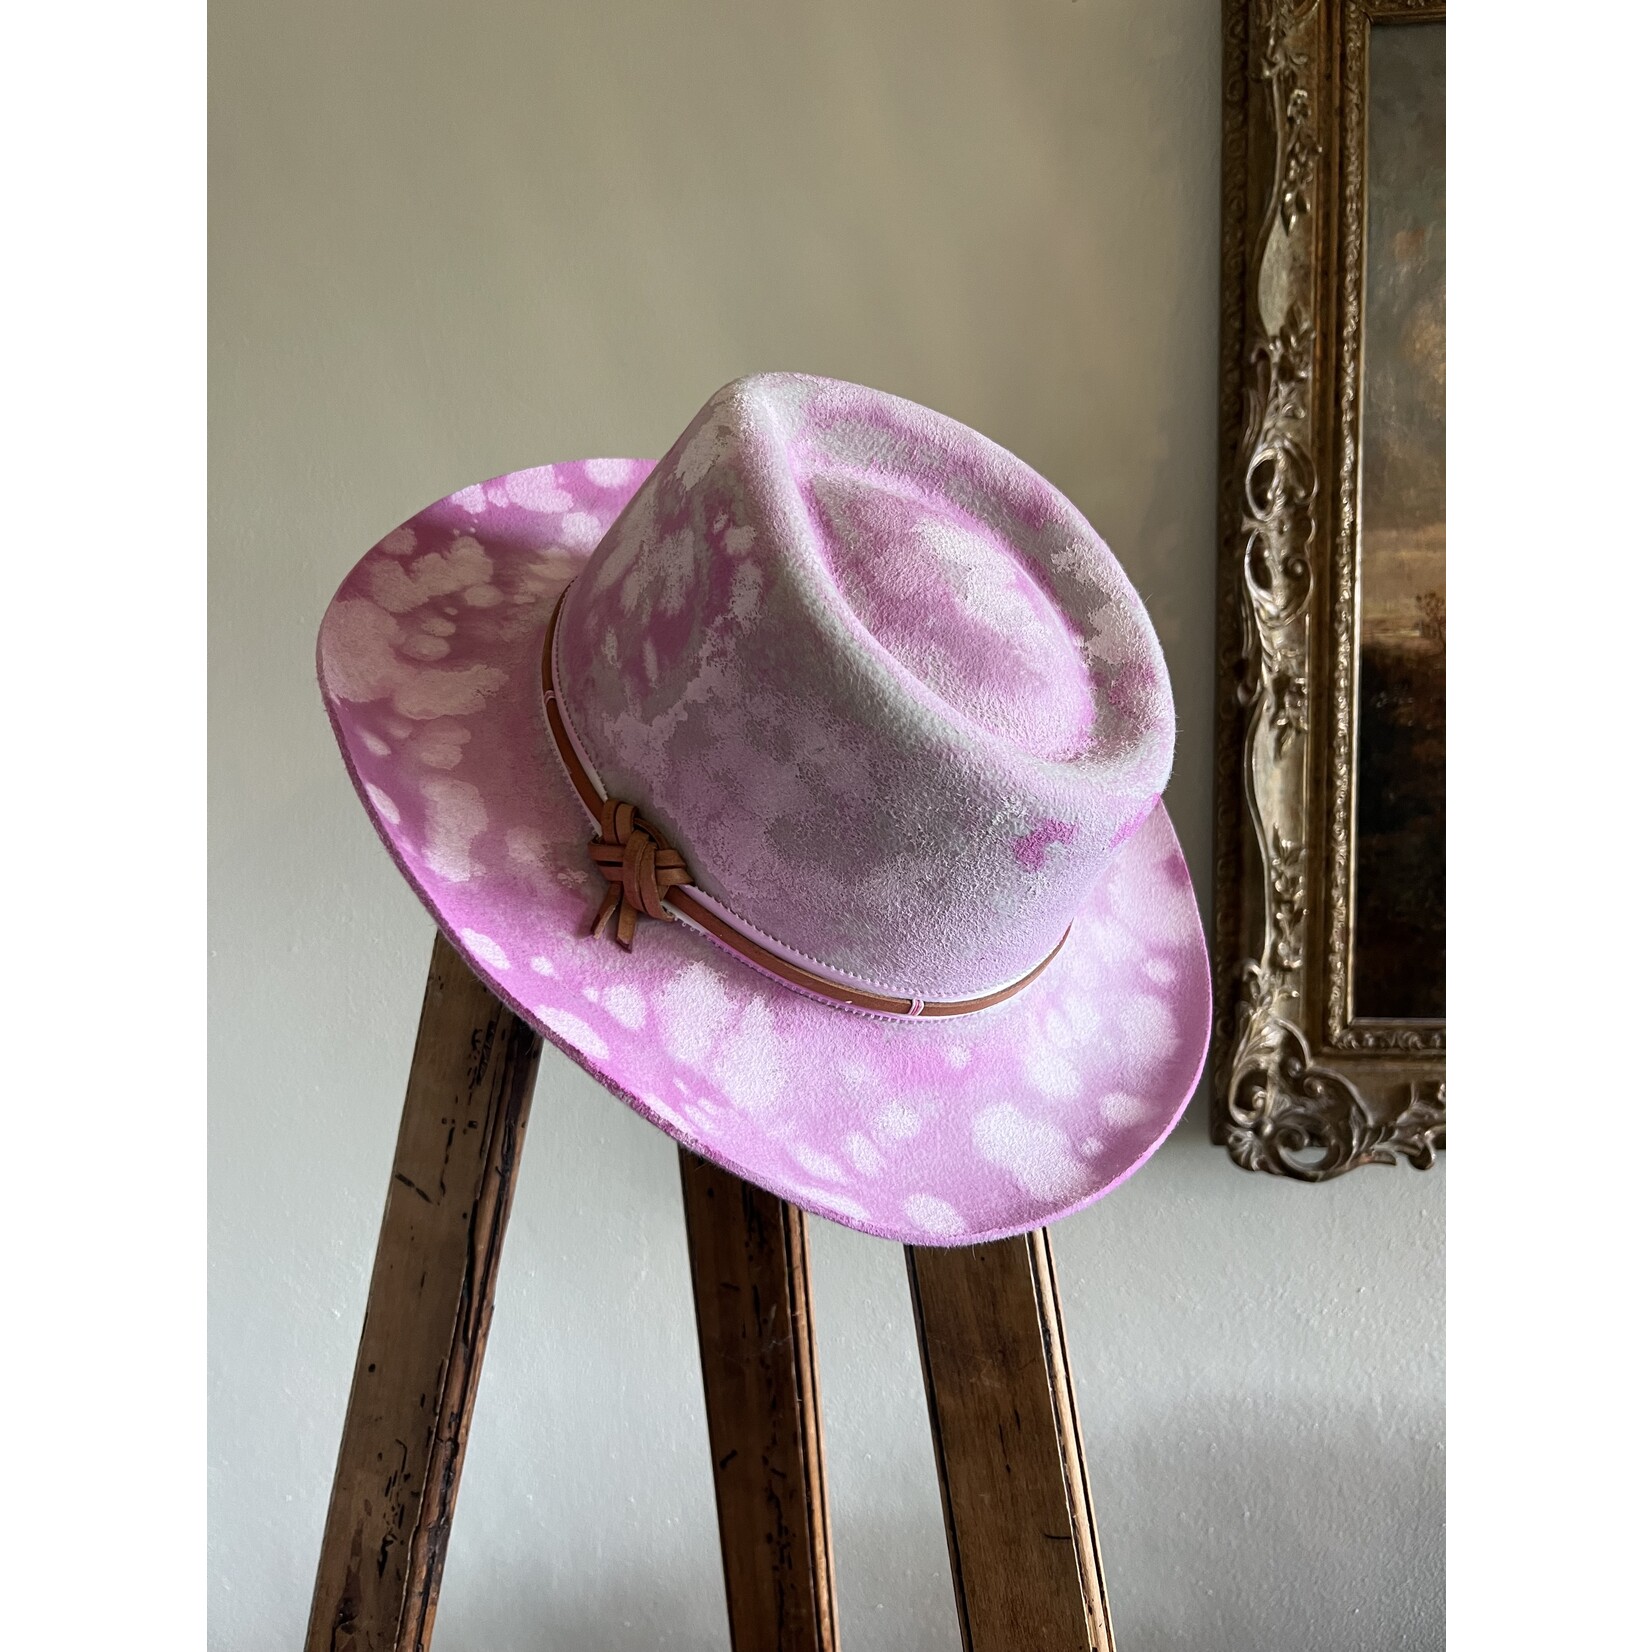 JR Hat - One of a kind, hand painted pink/white